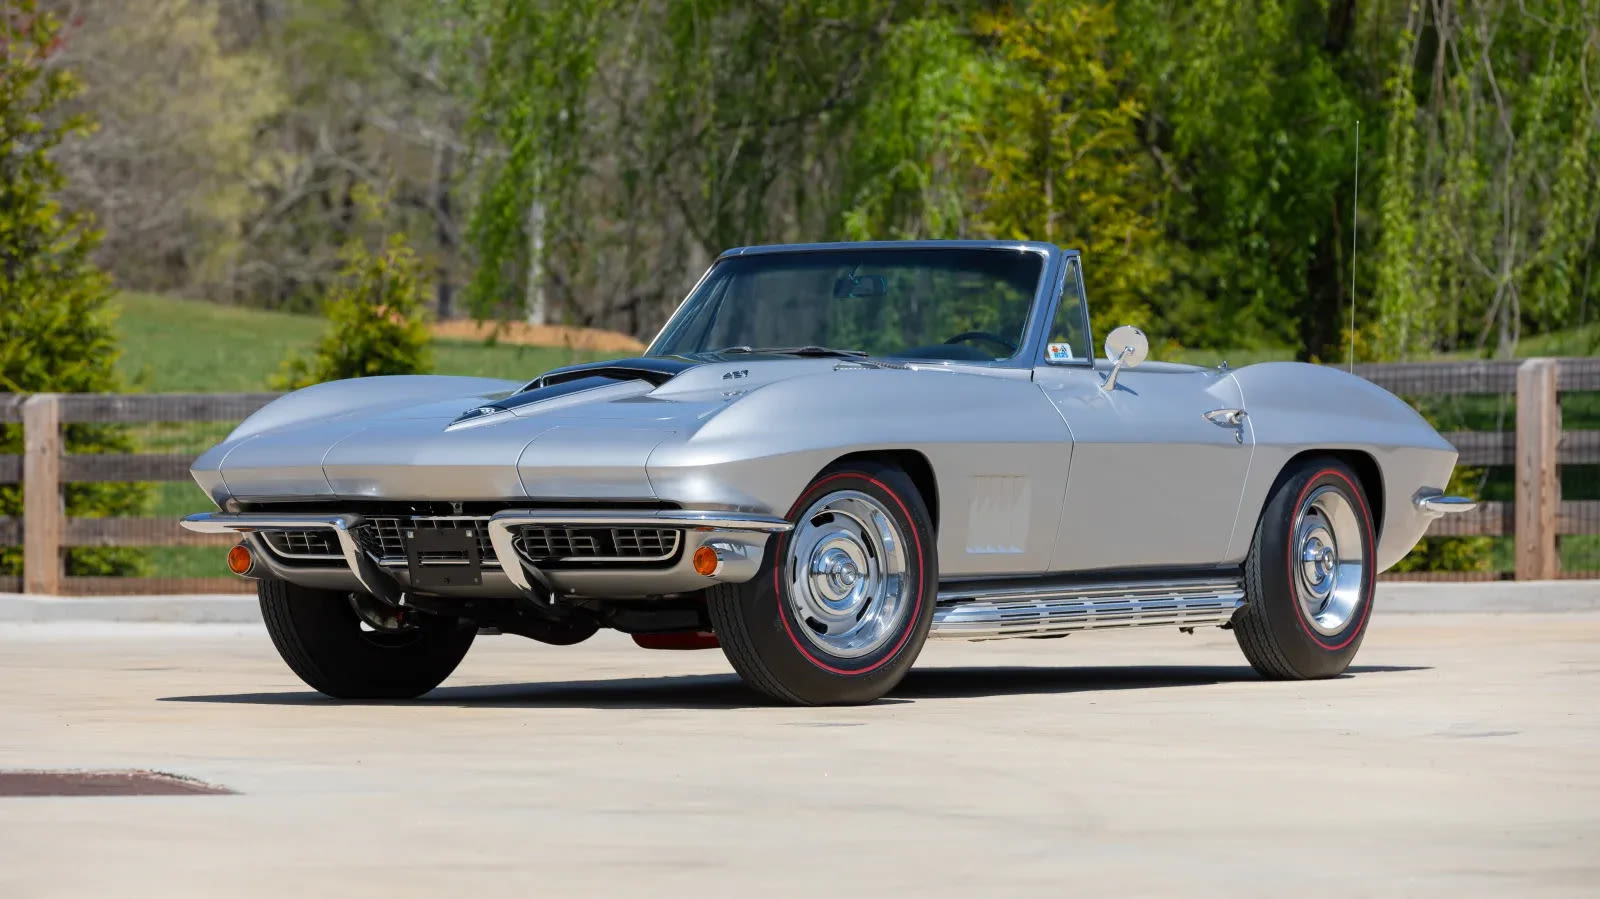 This Bloomington Gold & NCRS Winning 1967 Corvette Roadster is Selling at Mecum Indy